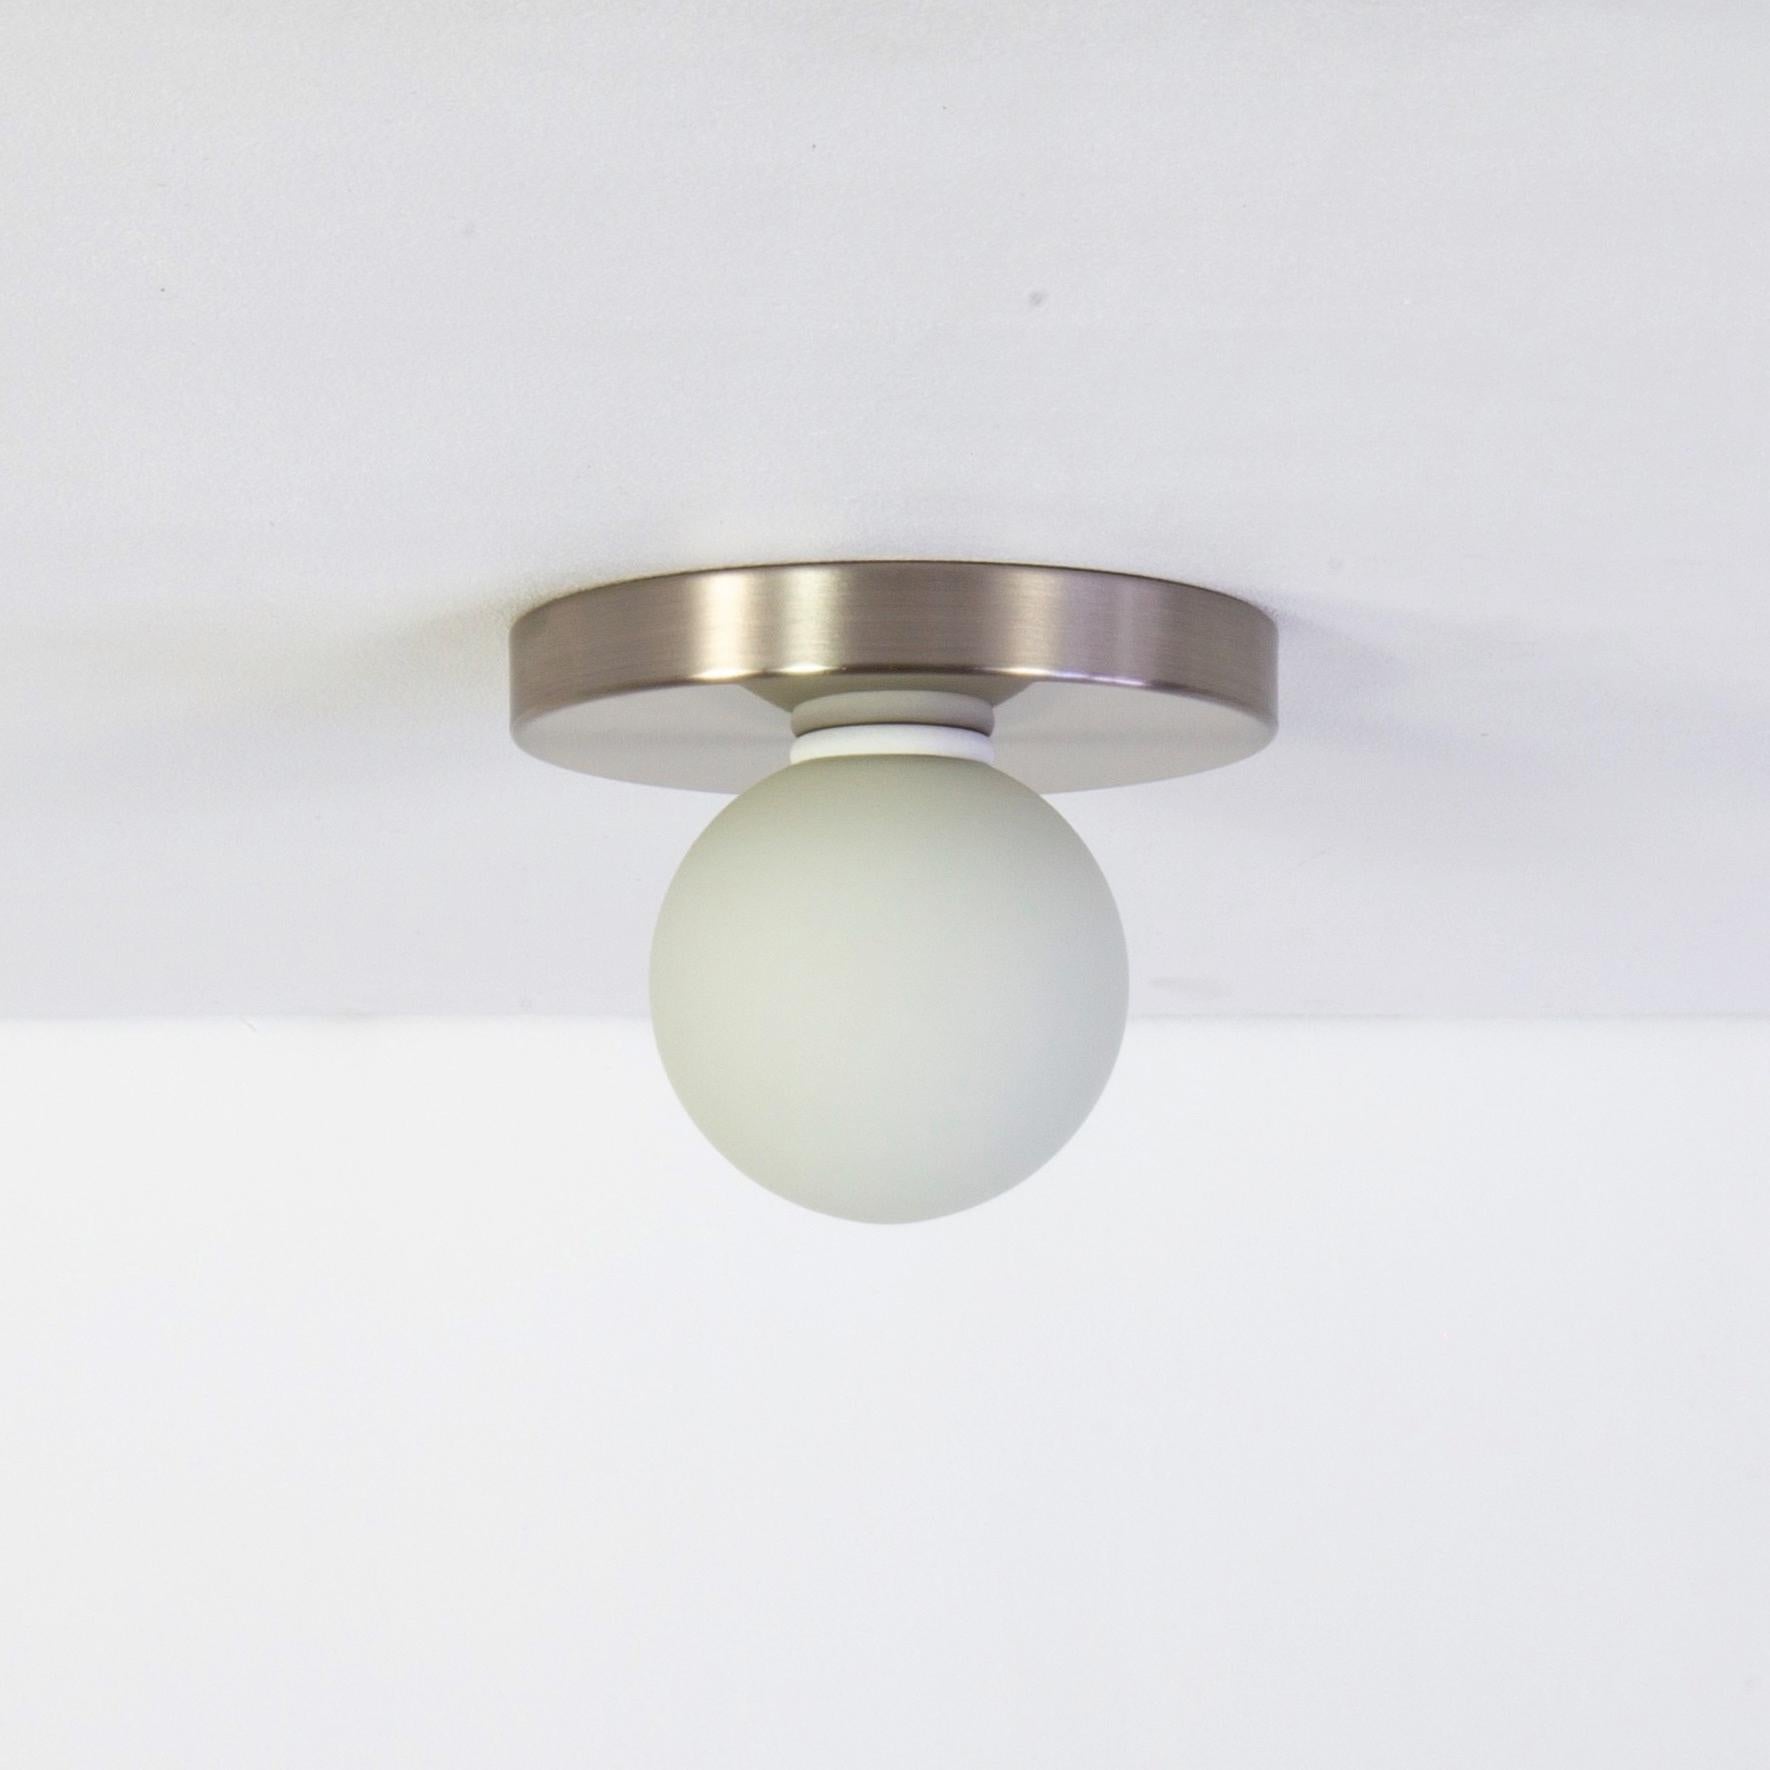 This listing is for 4x Globe Flush Mounts in brushed nickel designed and manufactured by Research.Lighting.

Materials: Brass, Steel & Glass
Finish: Brushed Nickel
Electronics: 1x G9 Socket, 1x 4.5 Watt LED Bulb (included), 450 Lumens
ADA Compliant.